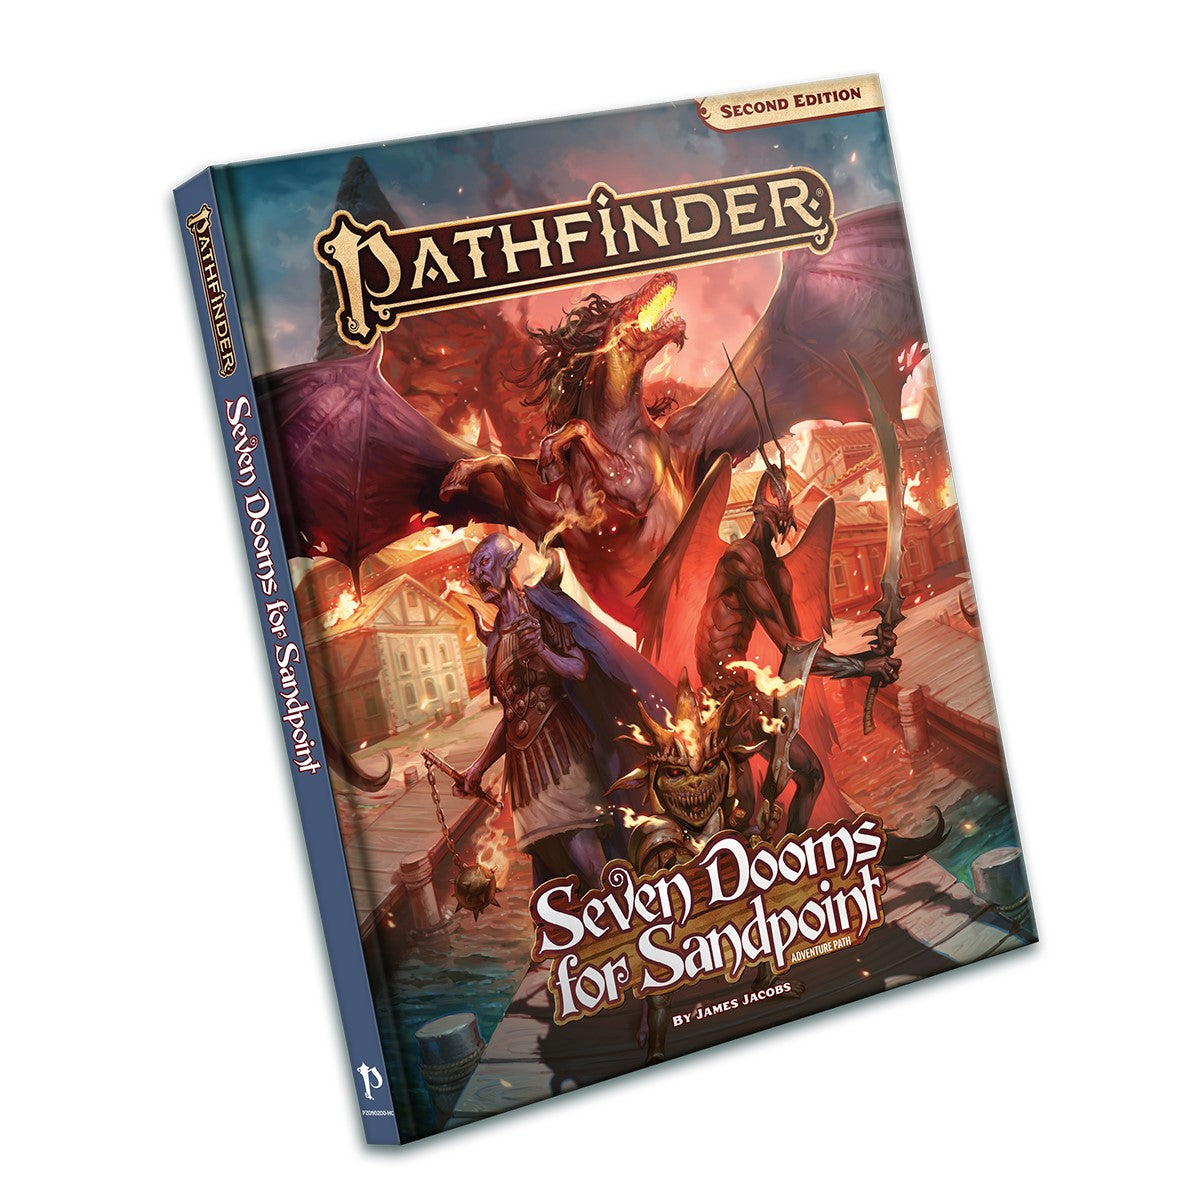 Pathfinder Second Edition: Adventure Path Seven Dooms for Sandpoint Hardcover Edition (Preorder)